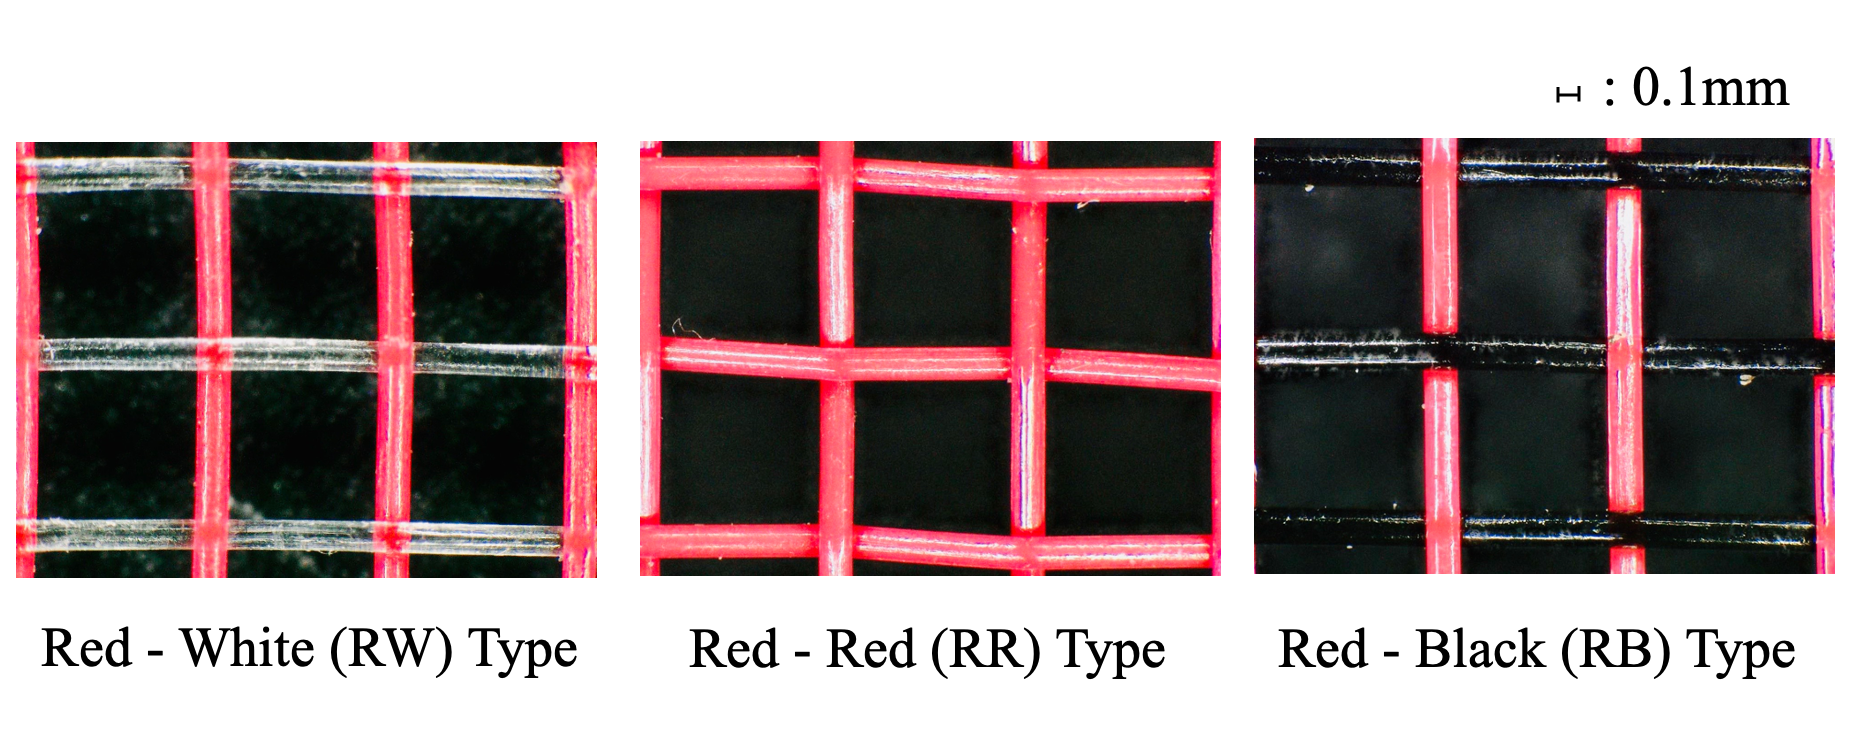 Photos of the different color combinations of red-white, red-black, and red-red nets.